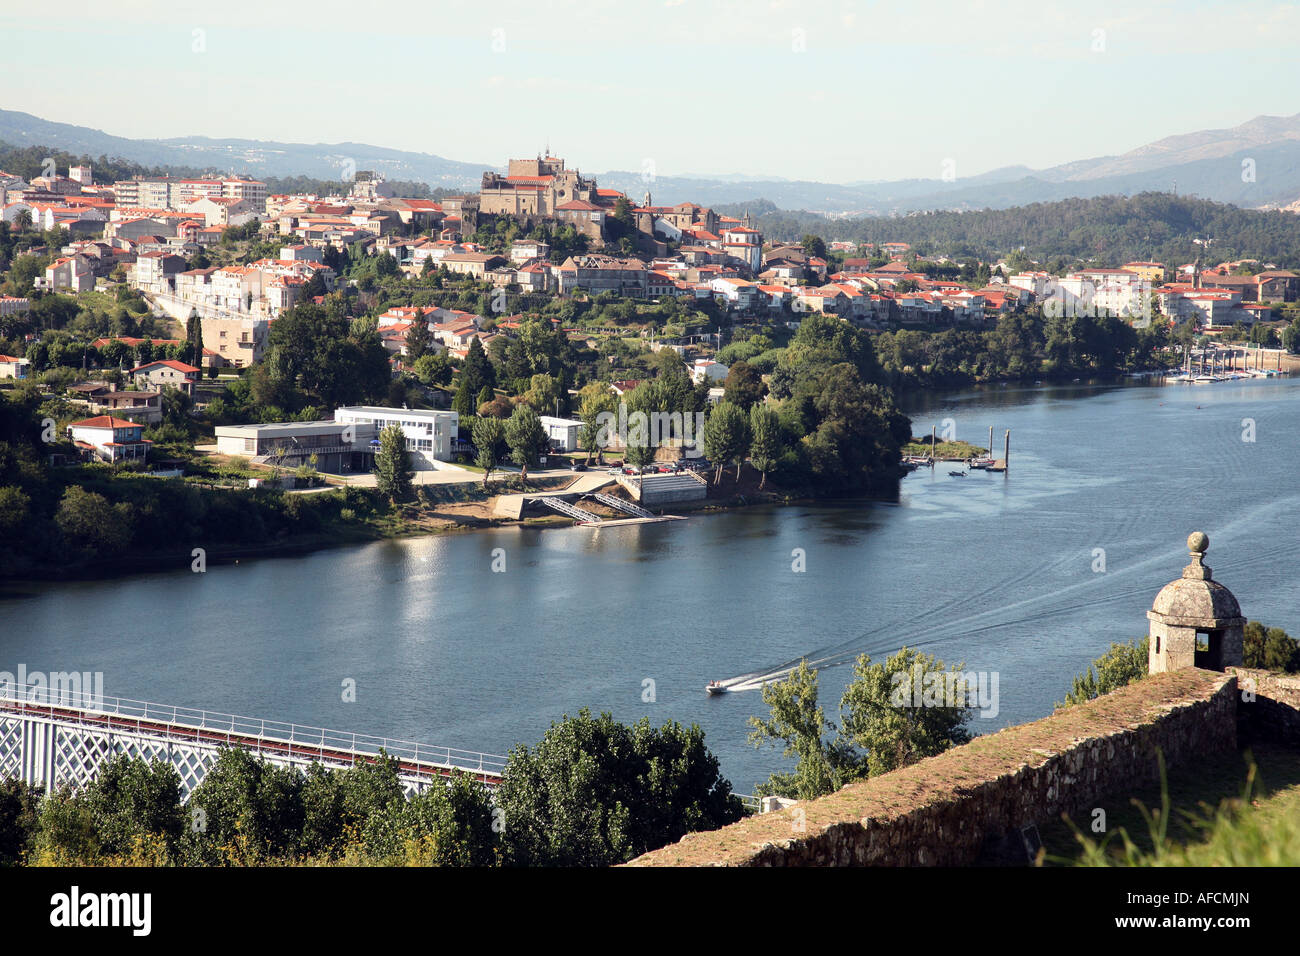 A view across the river Minho from Valenca do Minho in Portugal, to the city of Tui in Spain Stock Photo